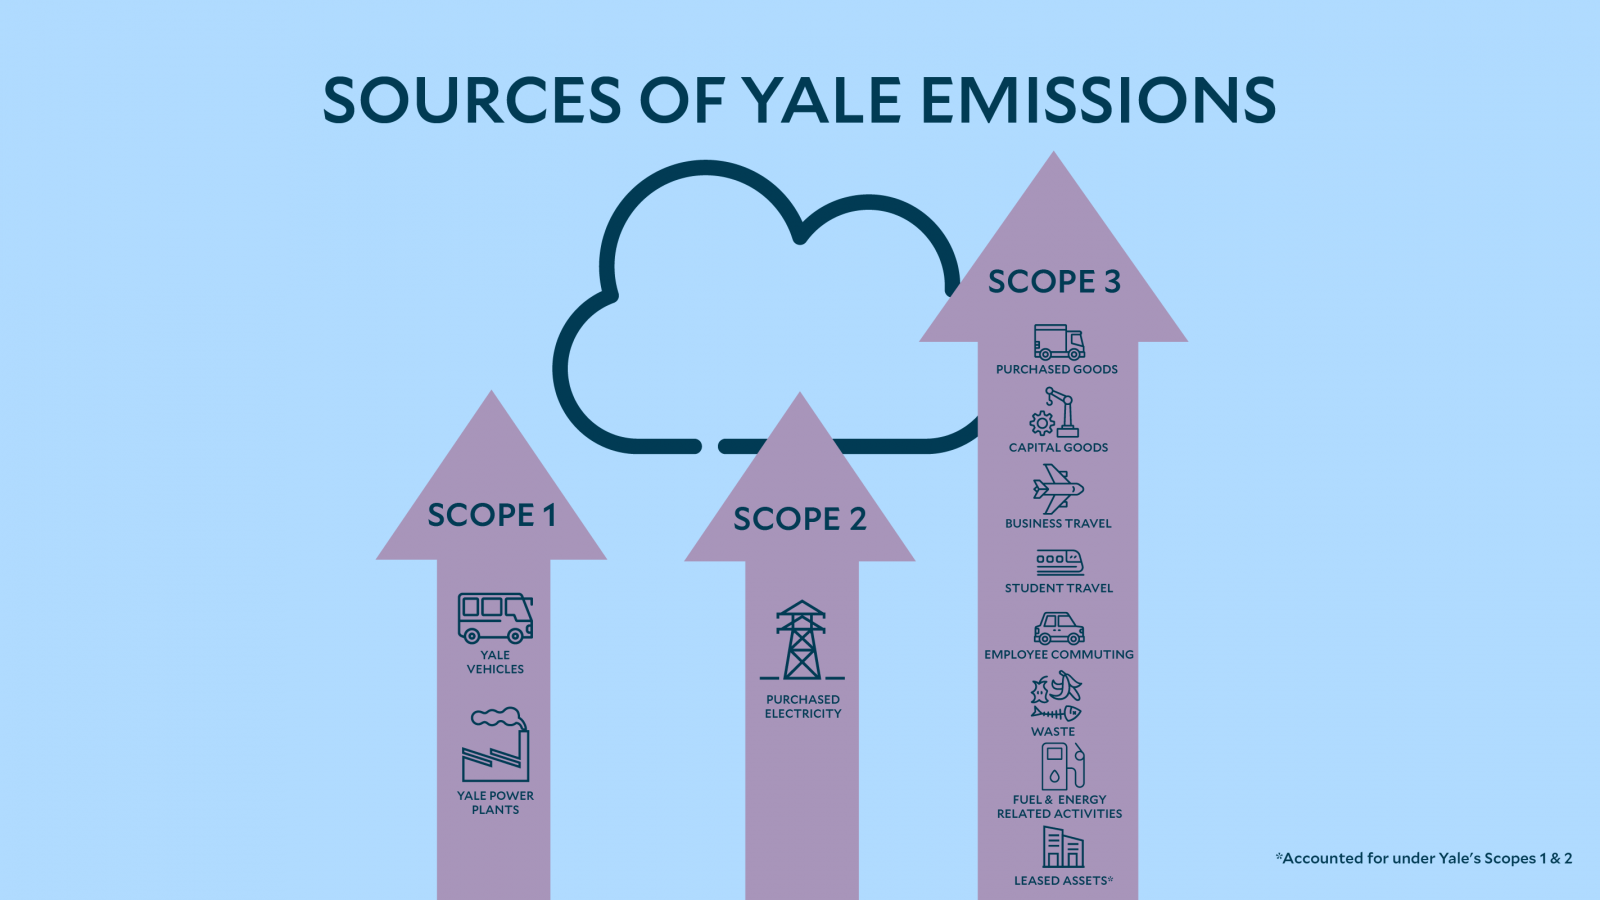 Infographic explaining the sources of Yale's Scope 1, 2, and 3 emissions